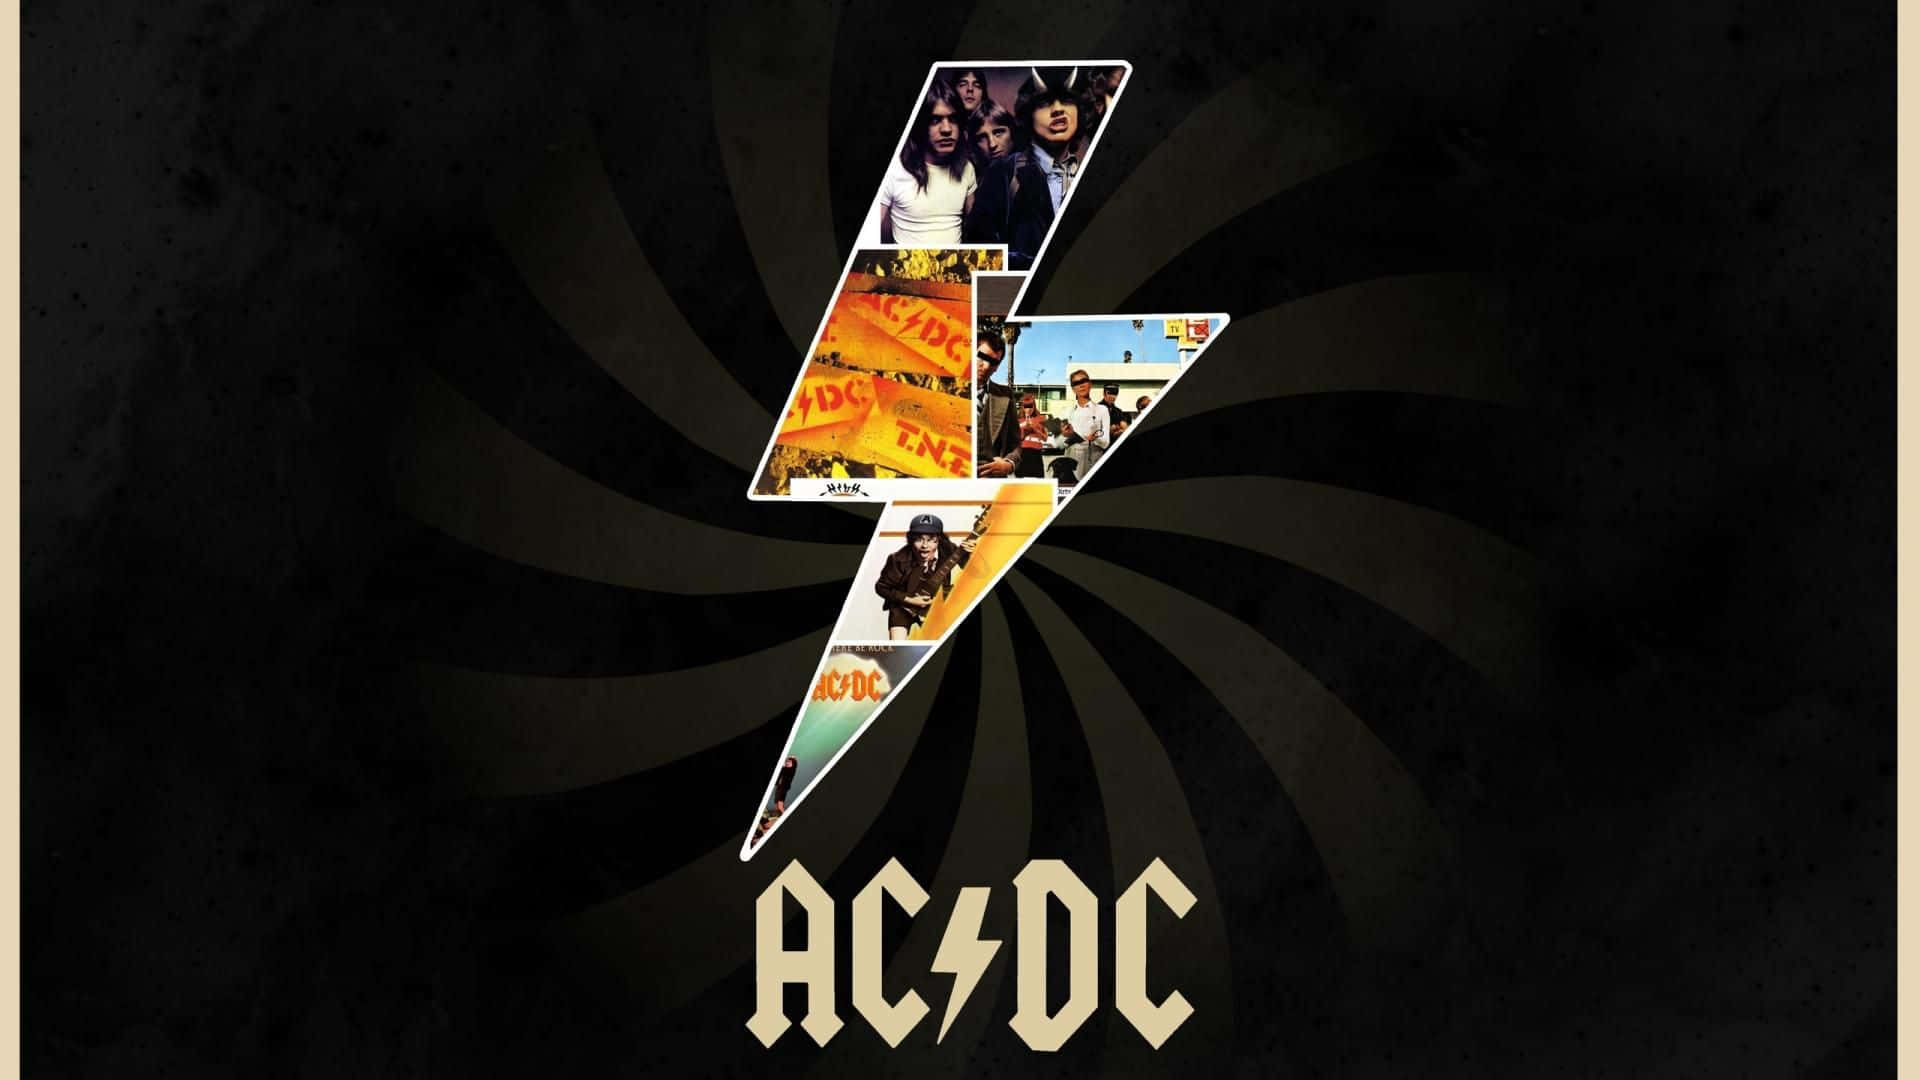 An Unforgettable Scene - AC/DC at Live Aid 1985 Wallpaper